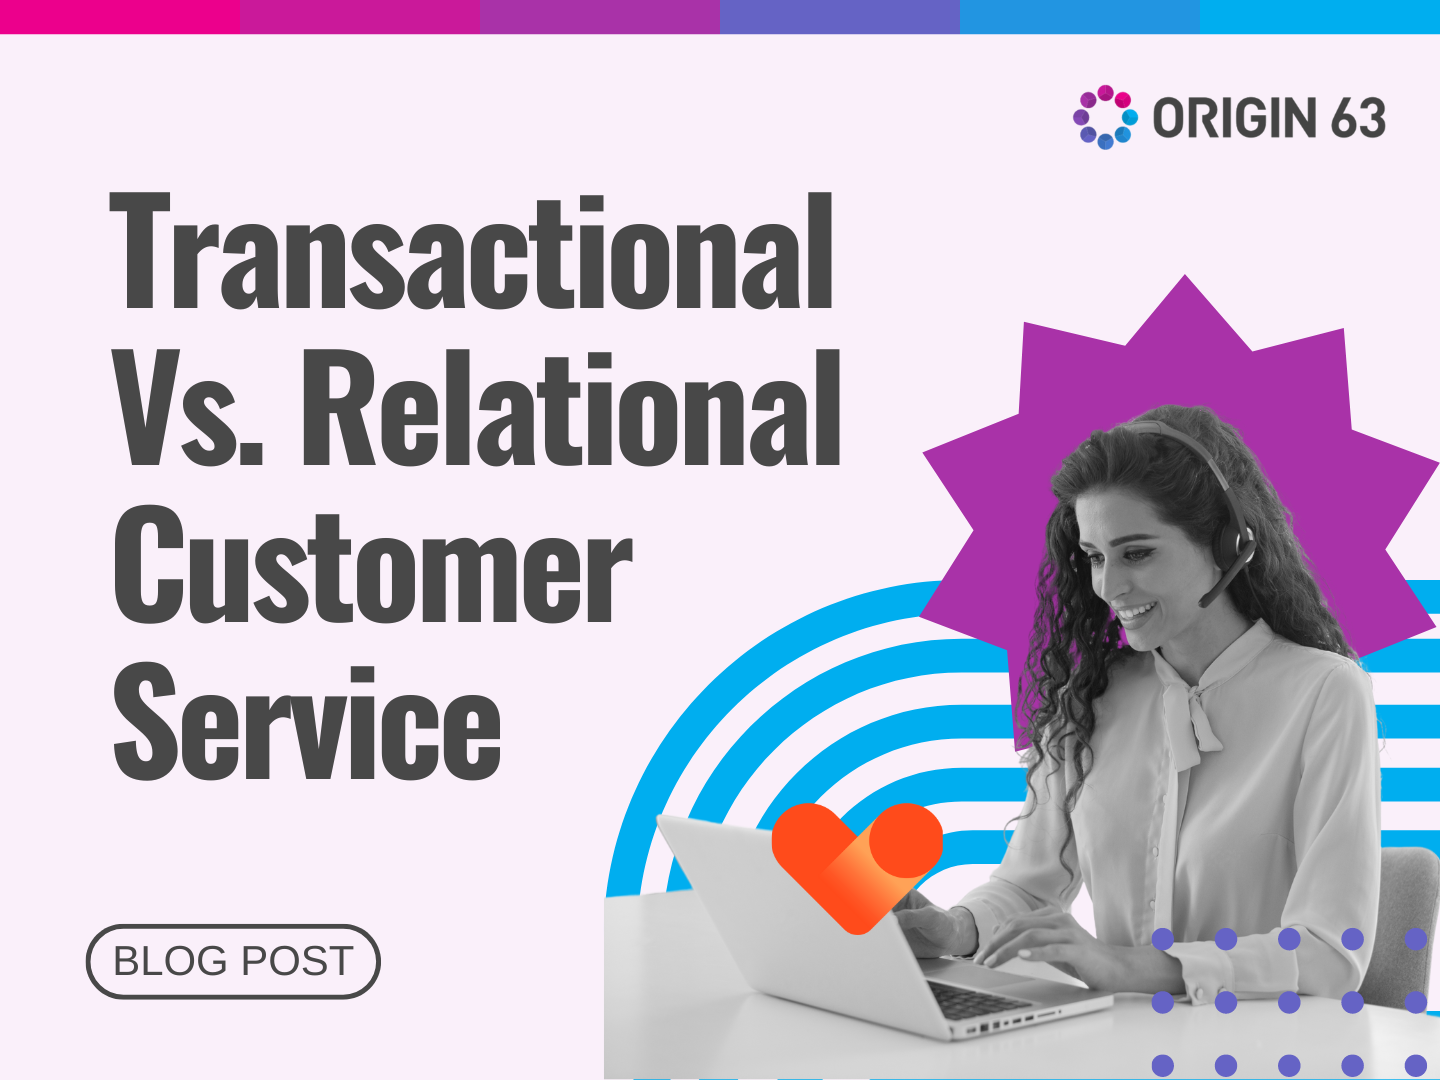 Discover the difference between transactional and relational service and learn strategies to build lasting customer loyalty.